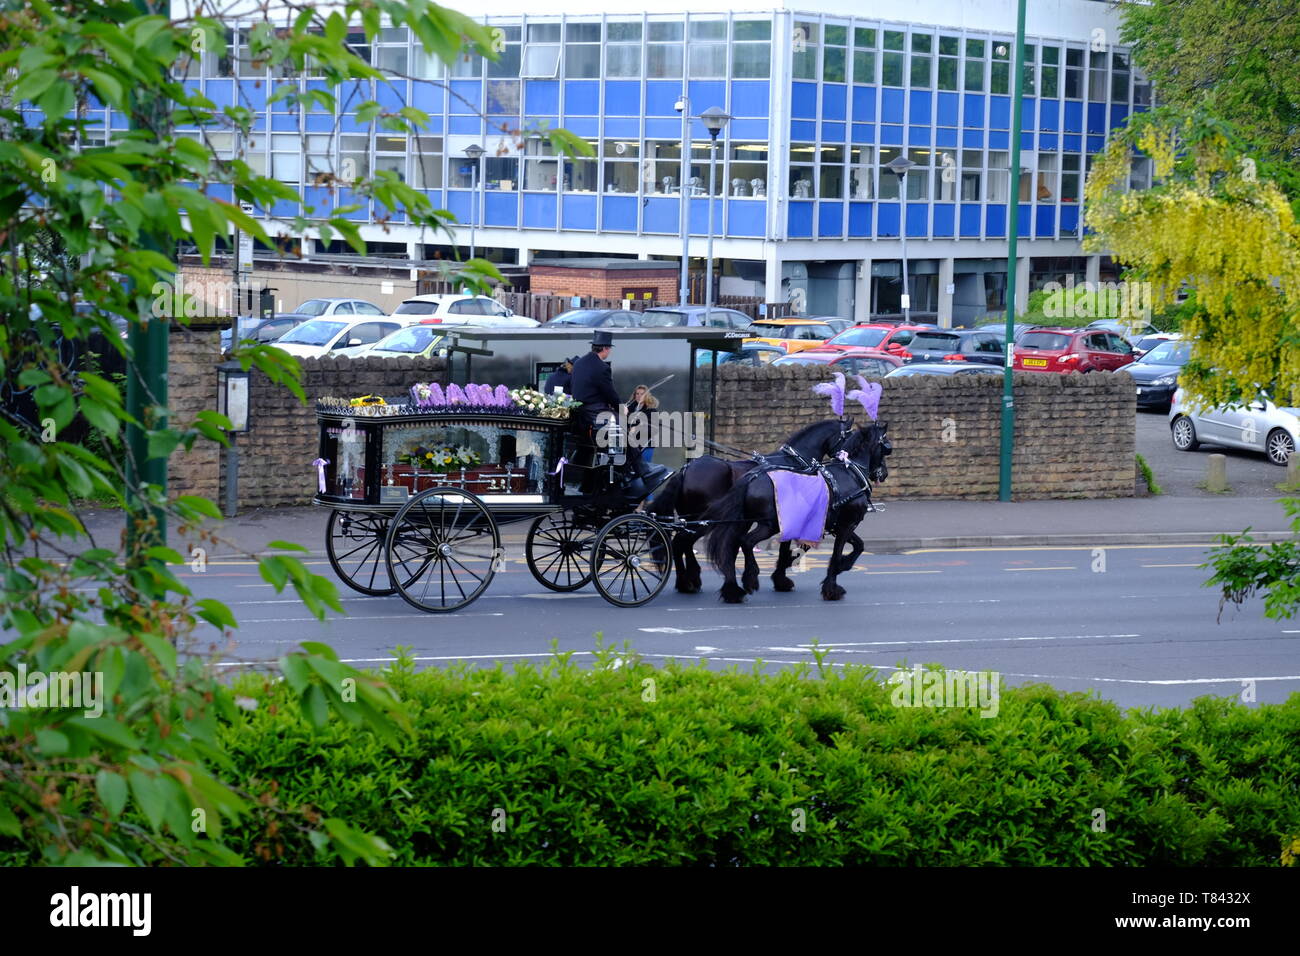 A horse-drawn funeral carriage passes by Clarendon College on Mansfield Road, Nottingham on its way to a funeral Stock Photo